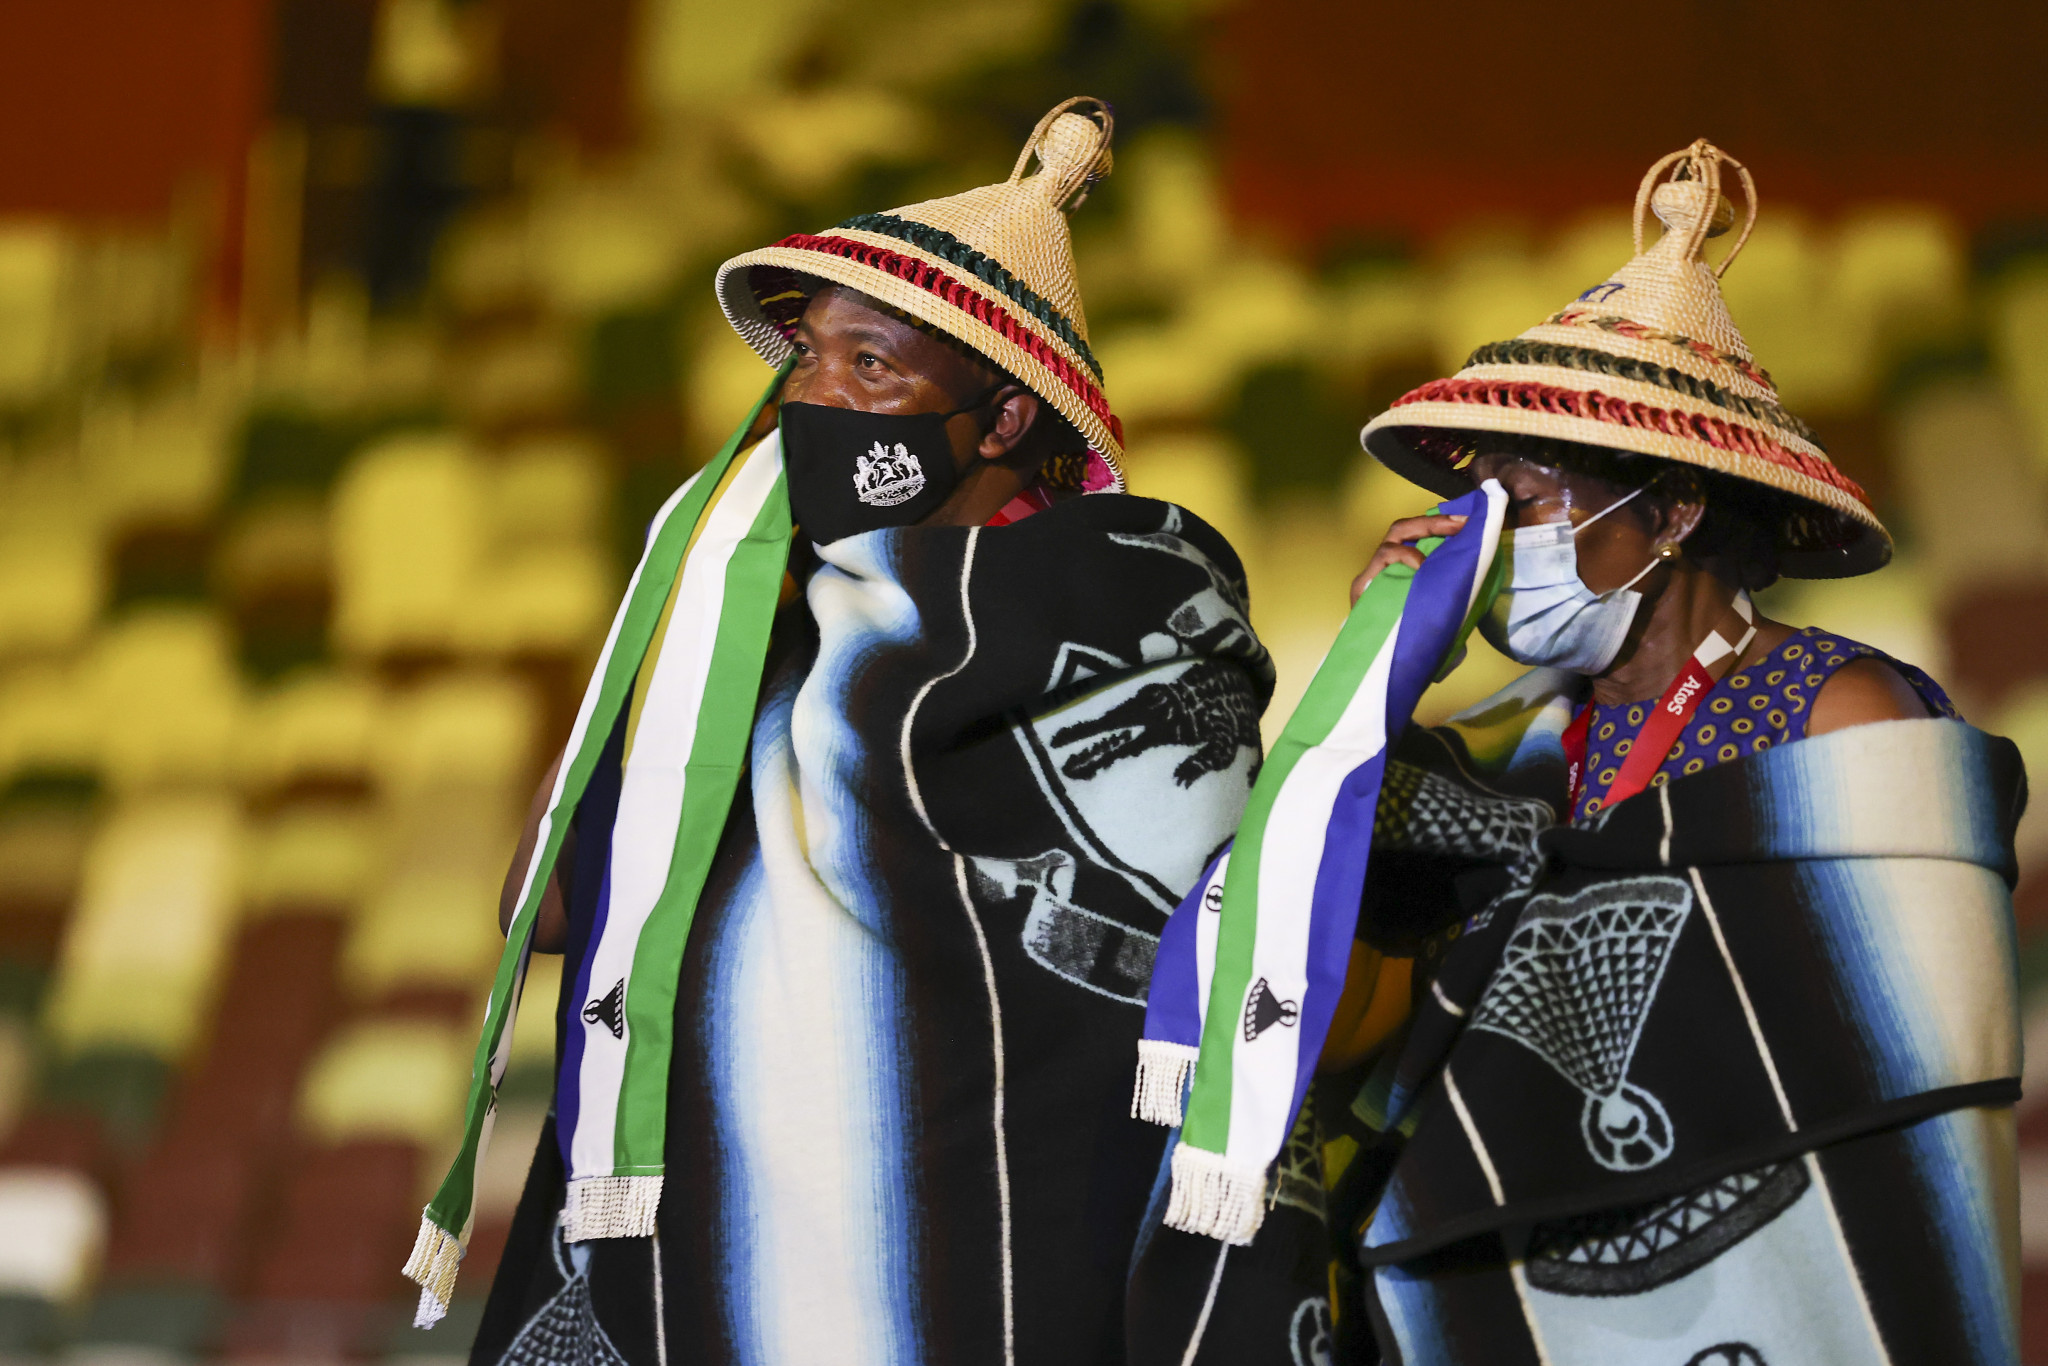 The Basotho straw hat is a symbol of Lesotho  ©Getty Images